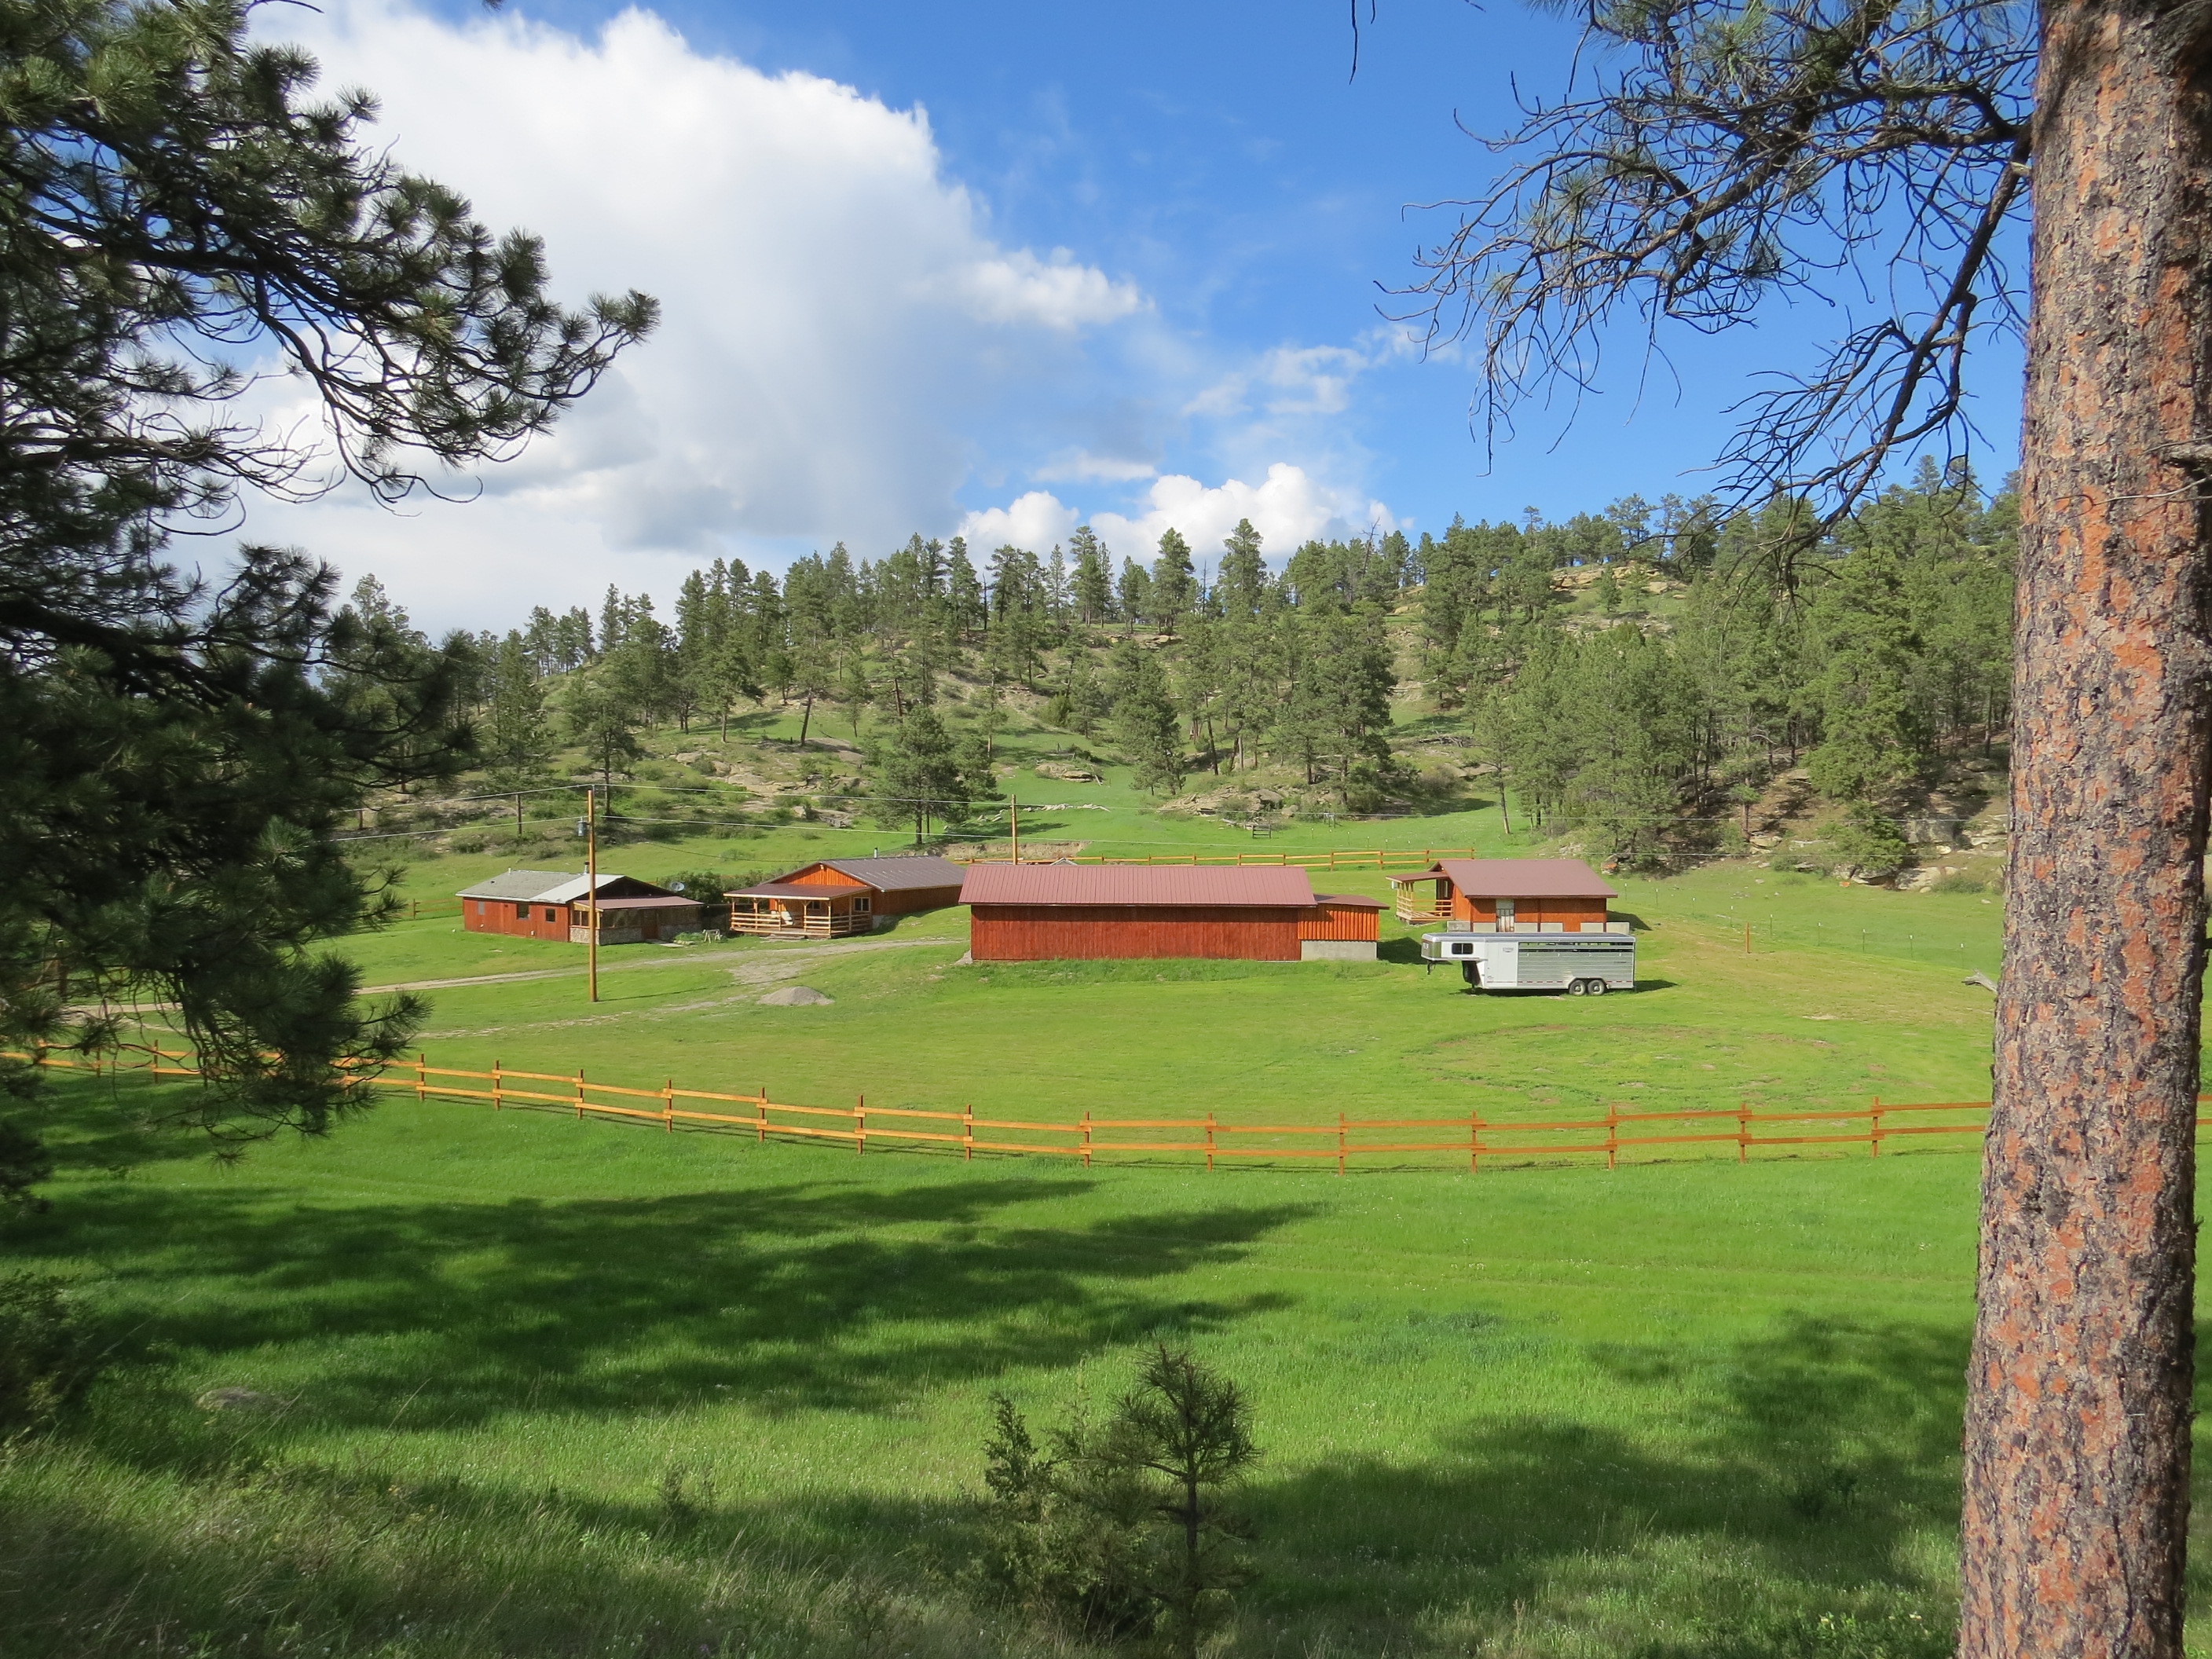 Hunting Ranches For Sale – 3 Tips To Consider Before Purchase